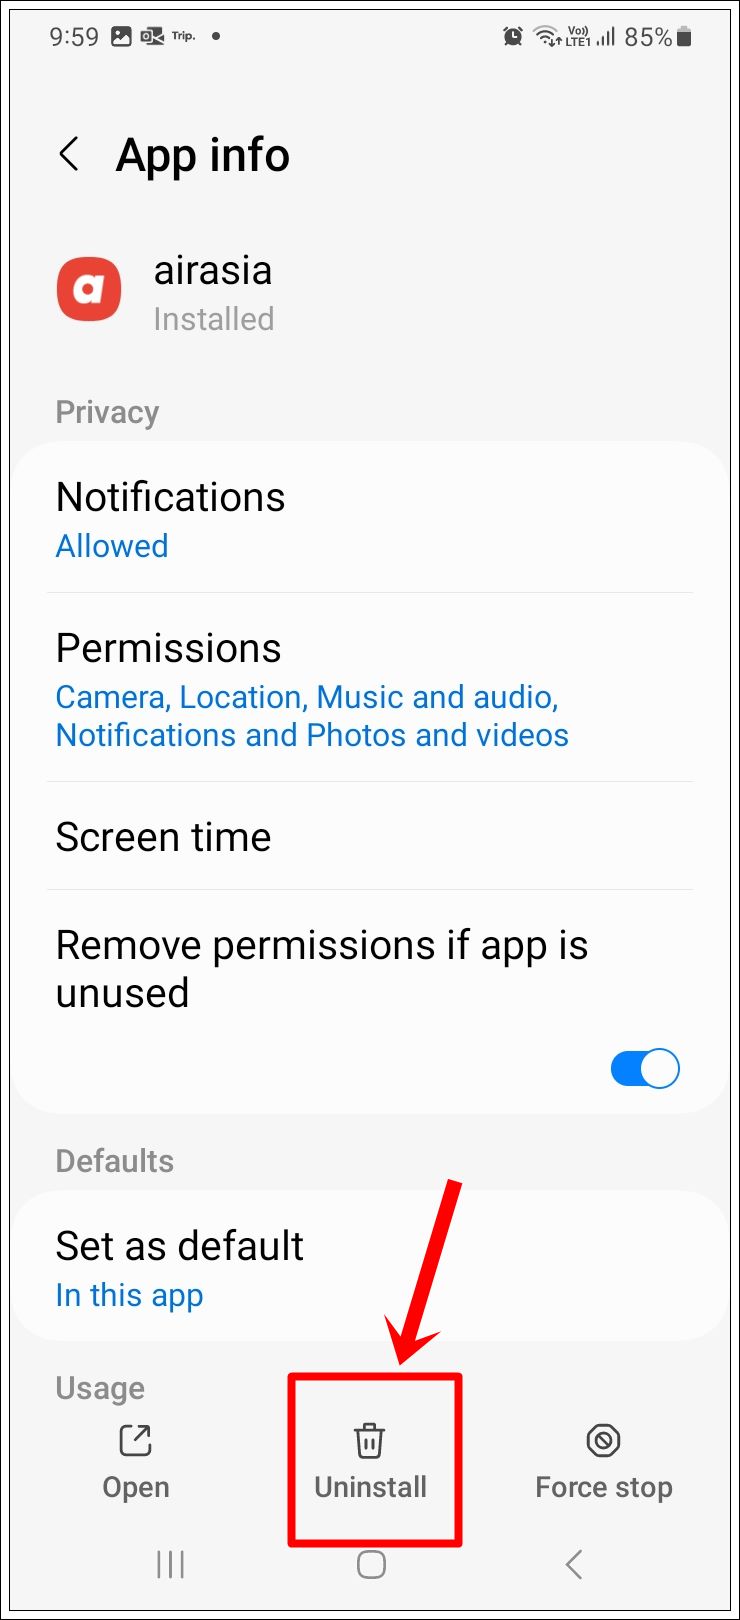 This image displays a screenshot of the 'App Info' page for a randomly selected app on a Samsung Galaxy phone. The 'Uninstall' button at the bottom is highlighted.